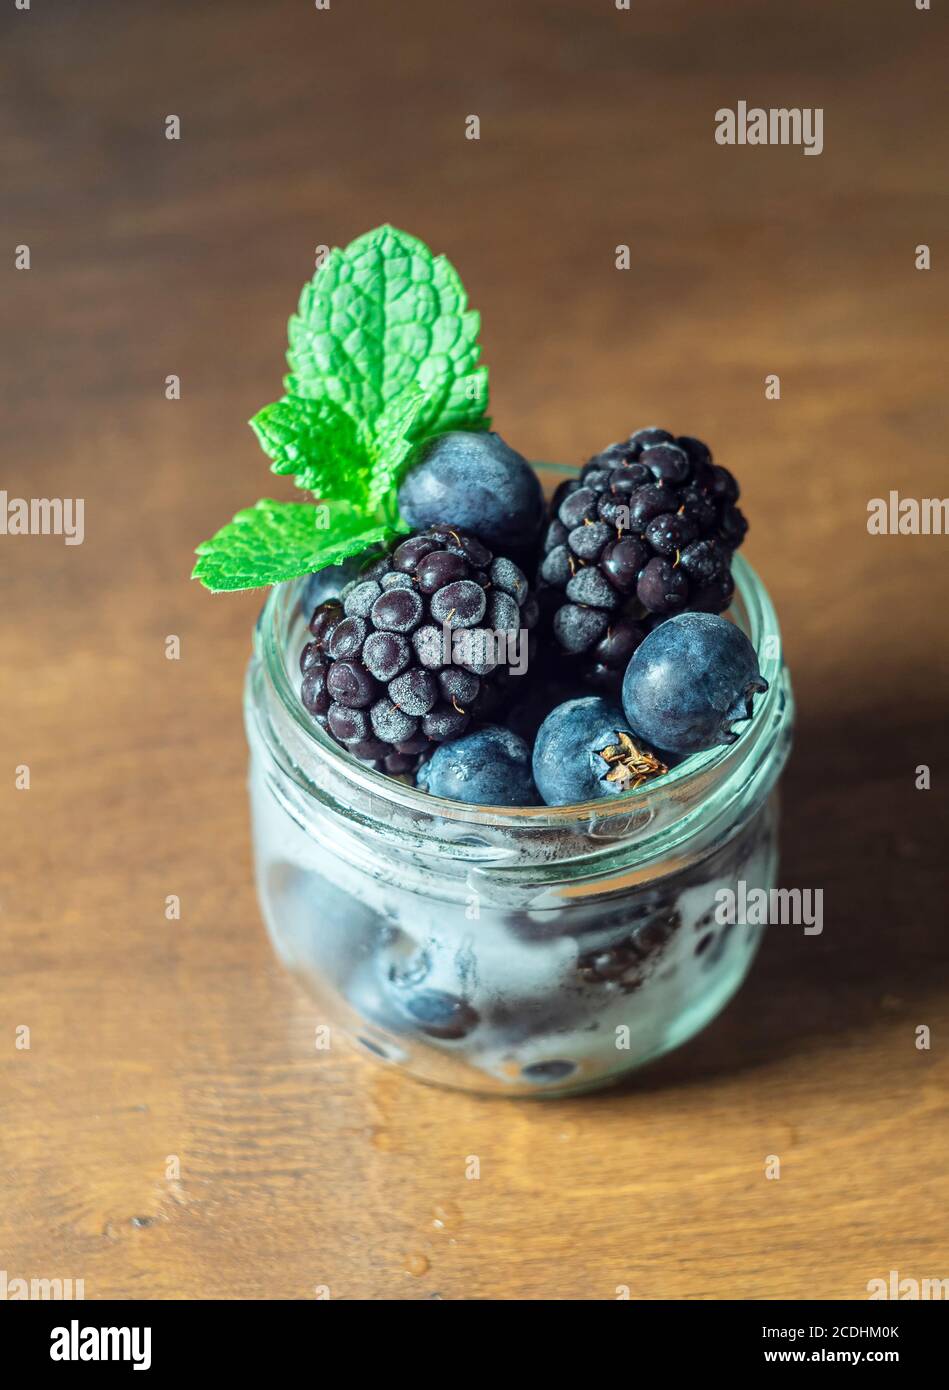 Frozen blackberry and blueberry berries, closeup. Selective focus, copy space. Stock Photo